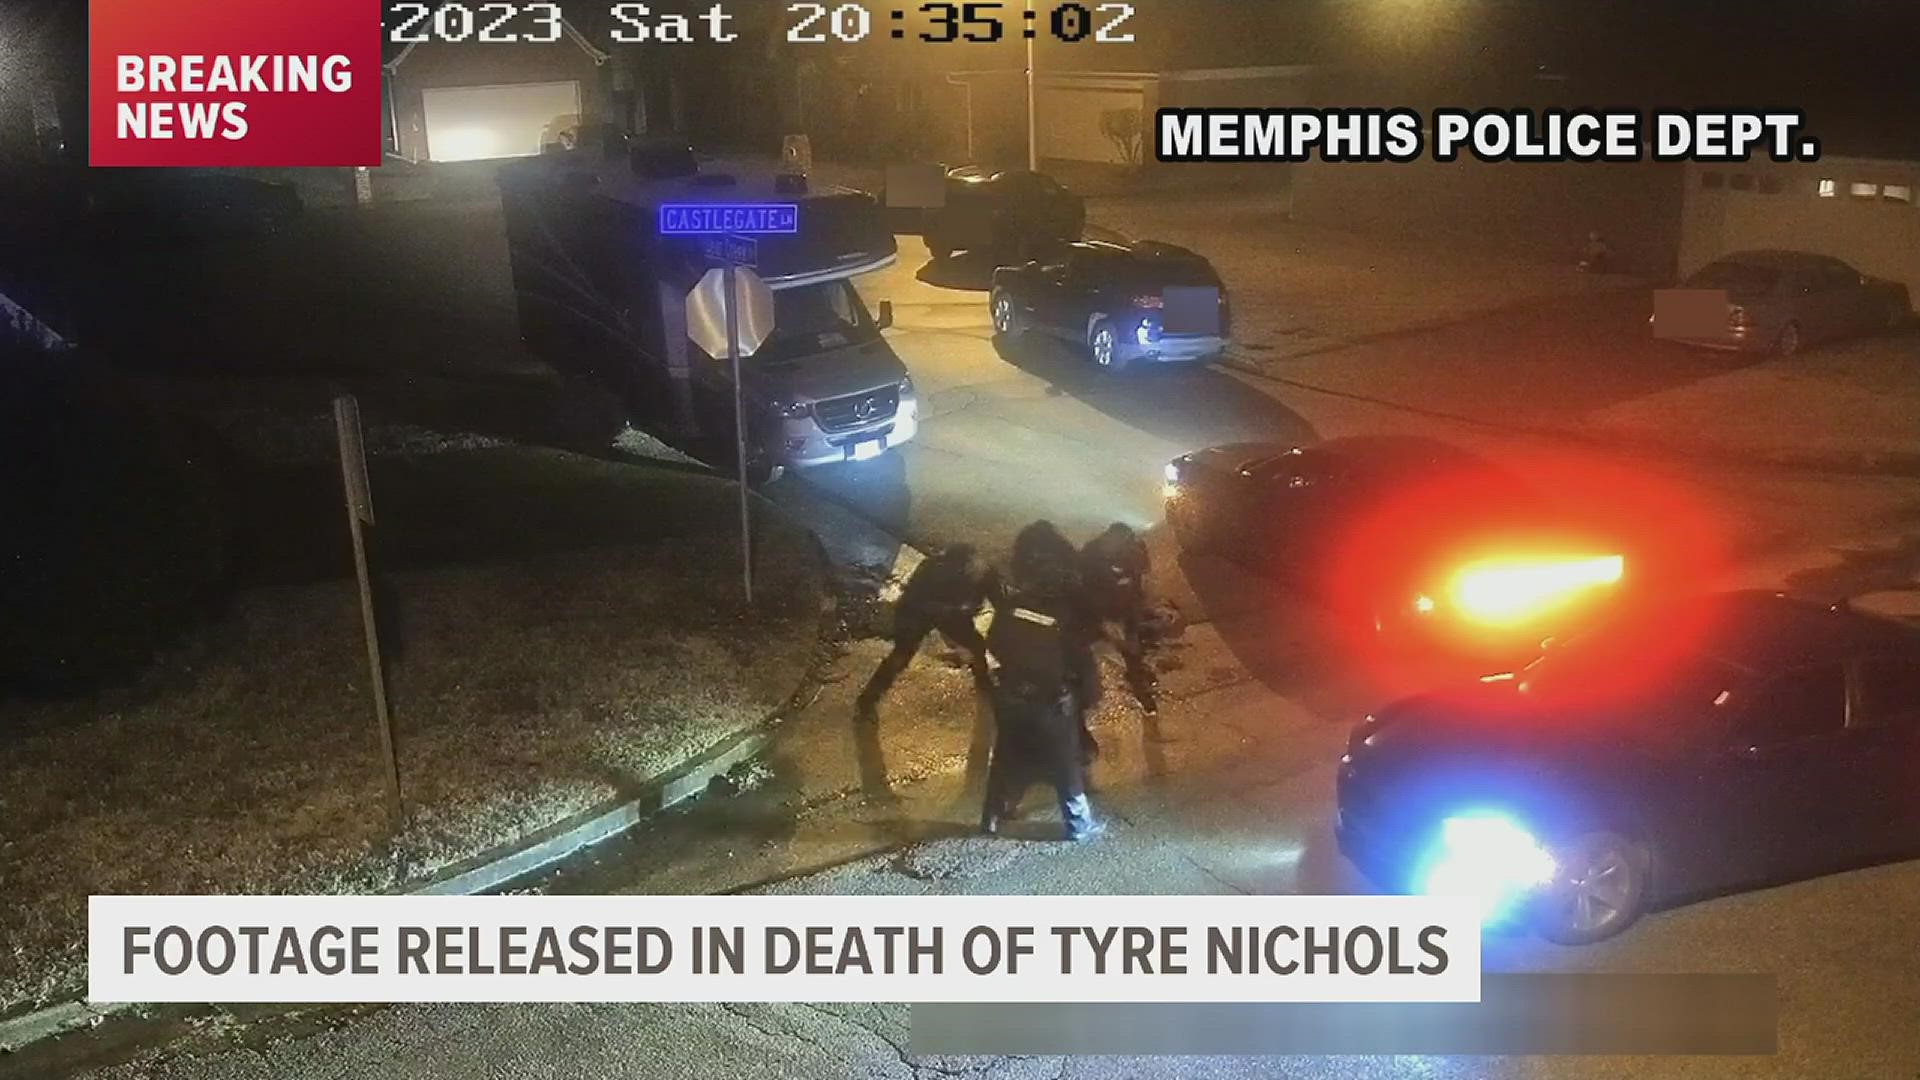 Tyre Nichols' death prompted murder charges Thursday against the Memphis officers and outrage at the country’s latest instance of police brutality.